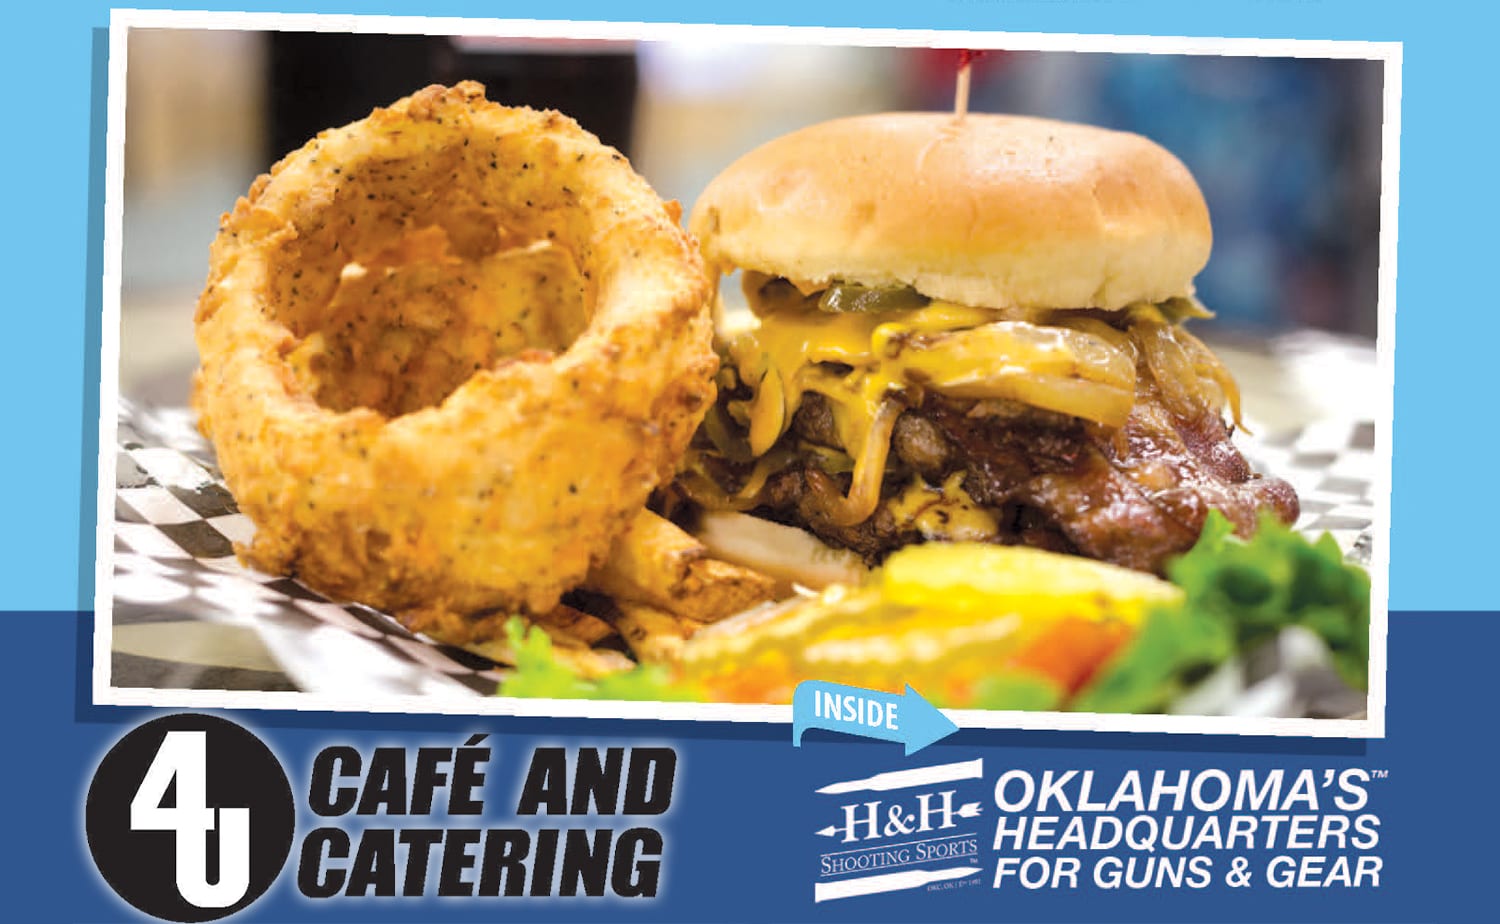 The 4UCafe and catering in H&H shooting at Oklahoma City, OK